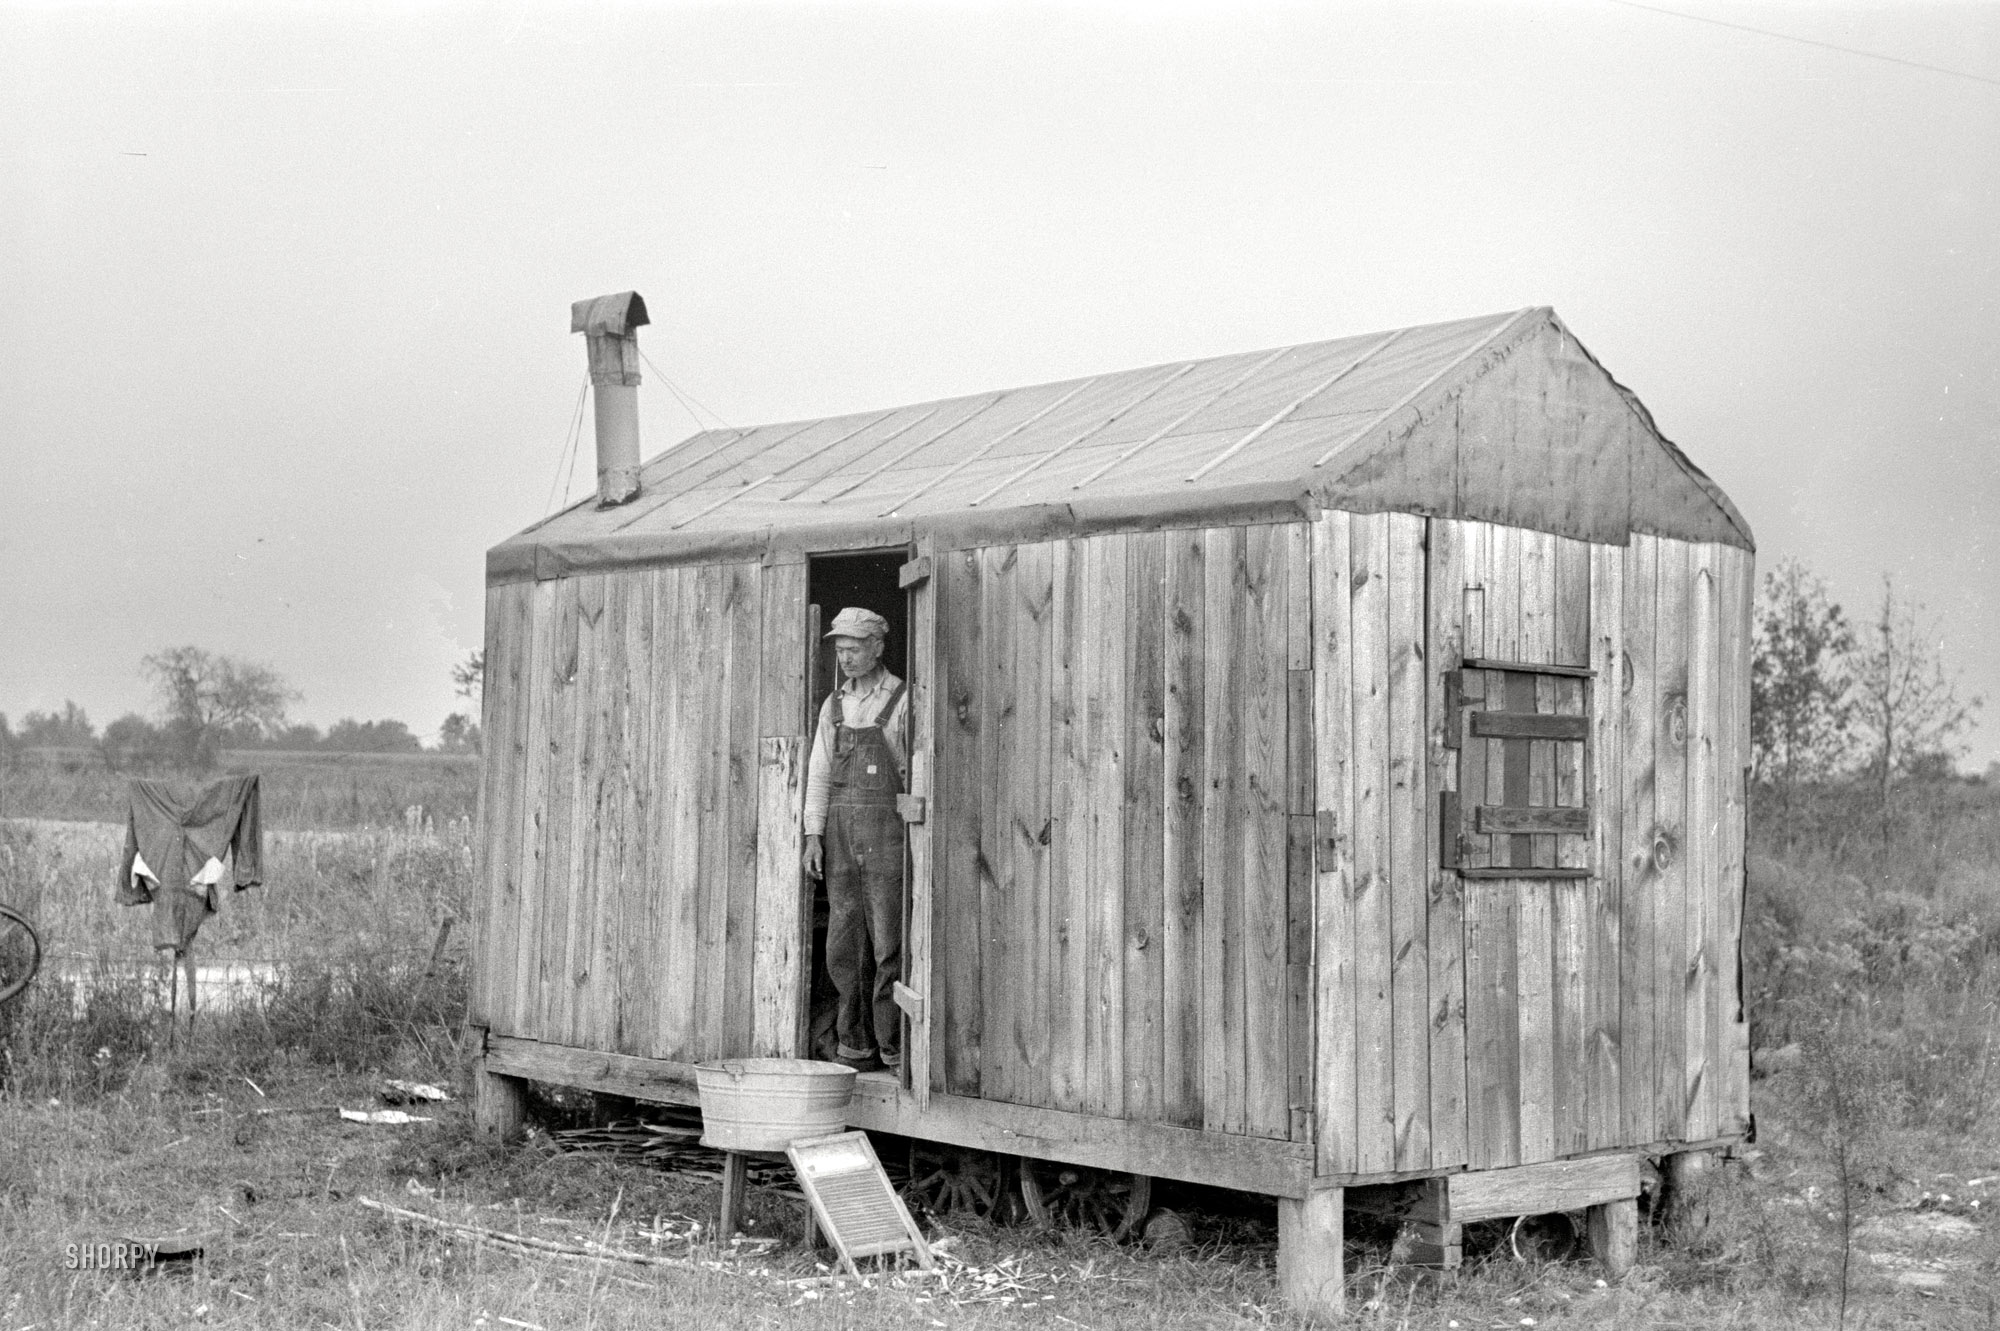 November 1938. "Shack of day laborer who works in sugarcane fields near New Iberia. He comes from a parish in northern Louisiana." 35mm nitrate negative by Russell Lee for the Farm Security Administration. View full size.